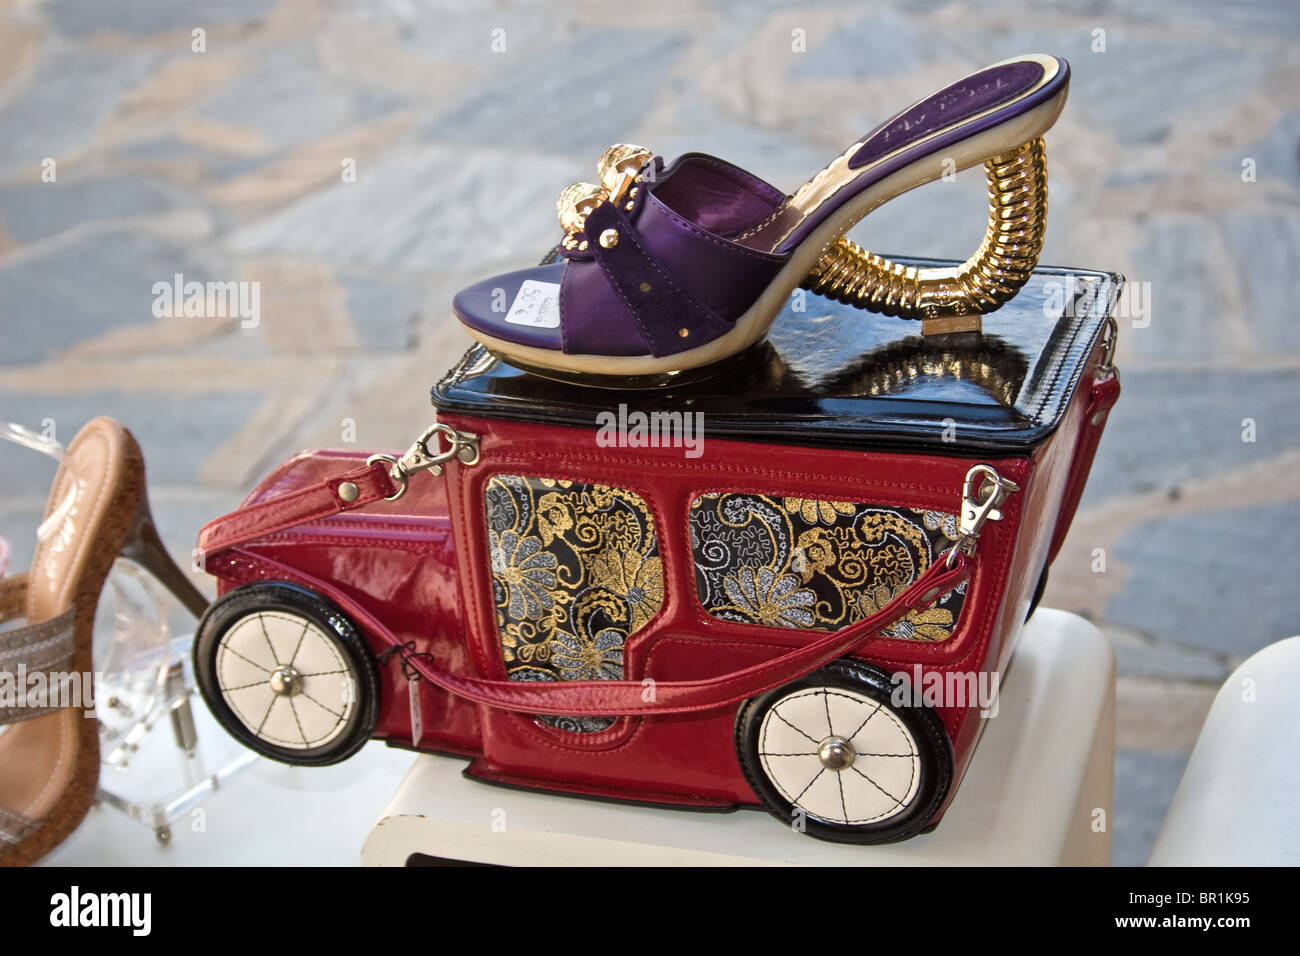 Shoes and handbags, fashion shop outdoor display, Old Town, Marbella, Costa del Sol, Andalucia, Spain Stock Photo